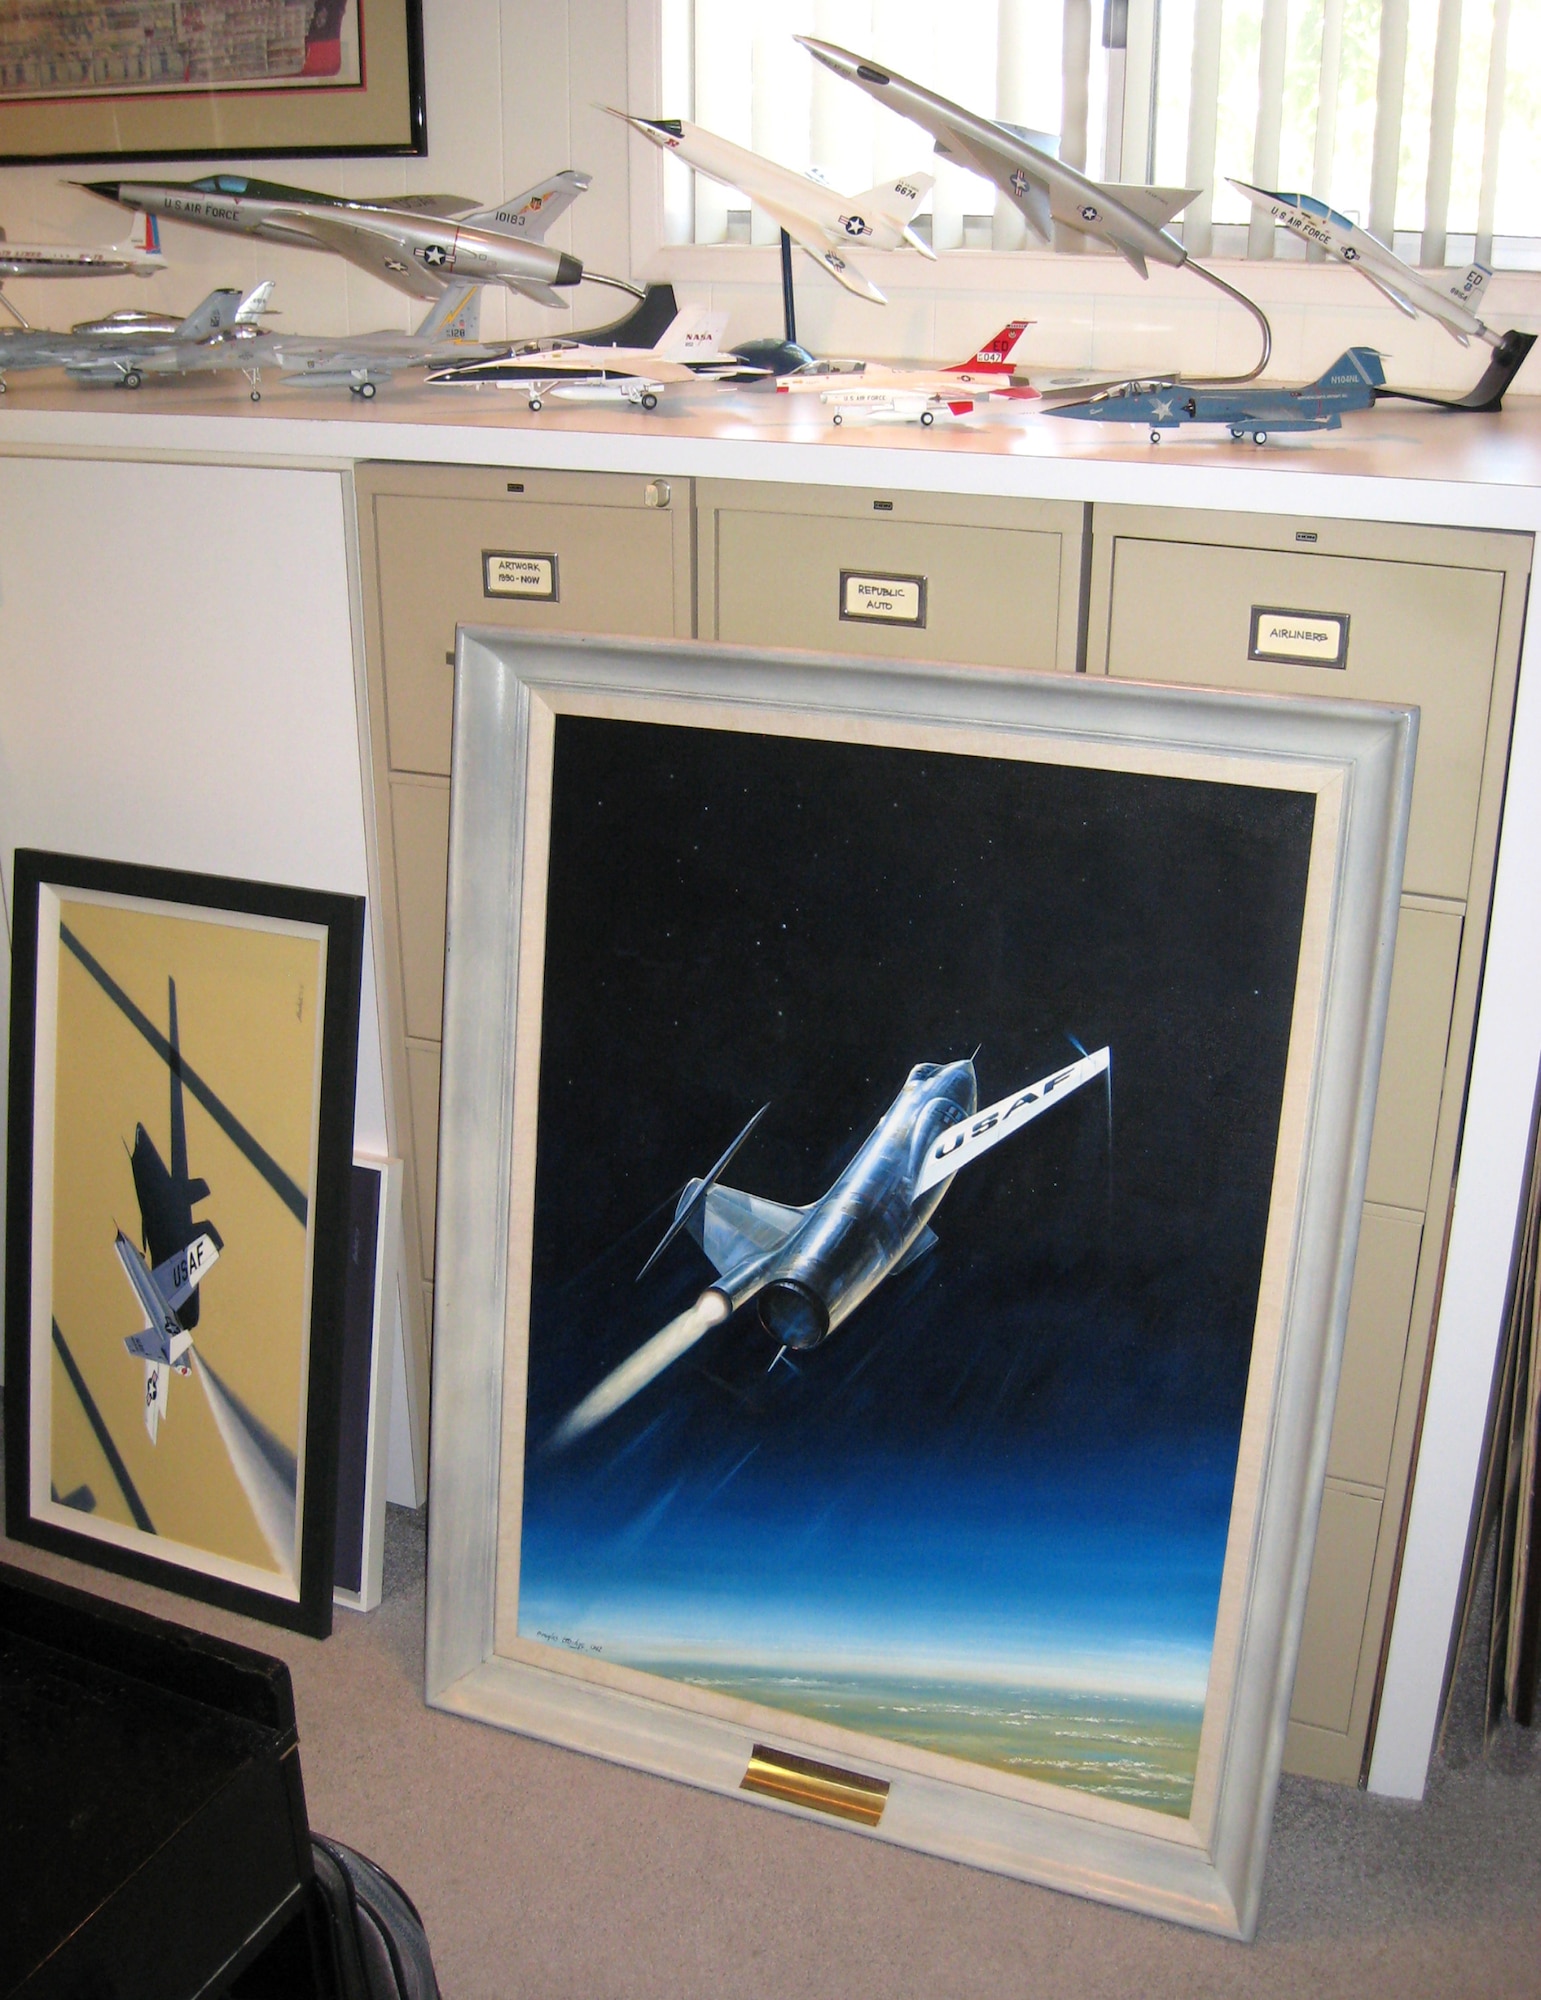 The restored NF-104 painting awaits pick-up at Mike Machat's studio in Woodland Hills, Calif. Once back at the the United States Air Force Test Pilot School, it will be displayed in the entrance, above the NF-104 model. (Courtesy Photo by Mike Machat)